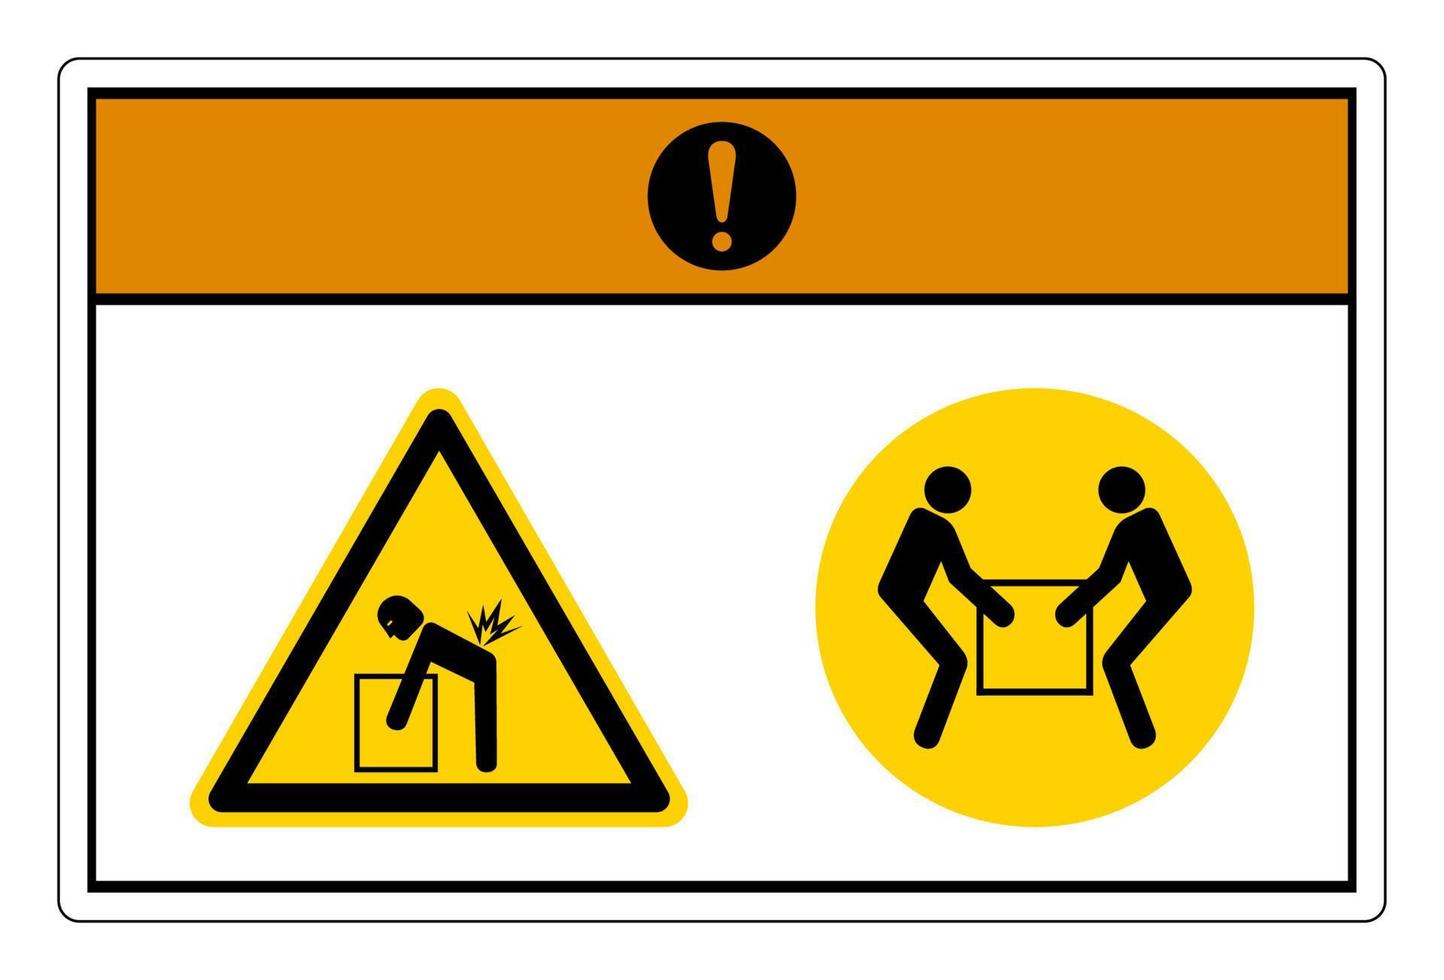 Warning Lift Hazard Use Two Person Lift Symbol Sign On White Background vector